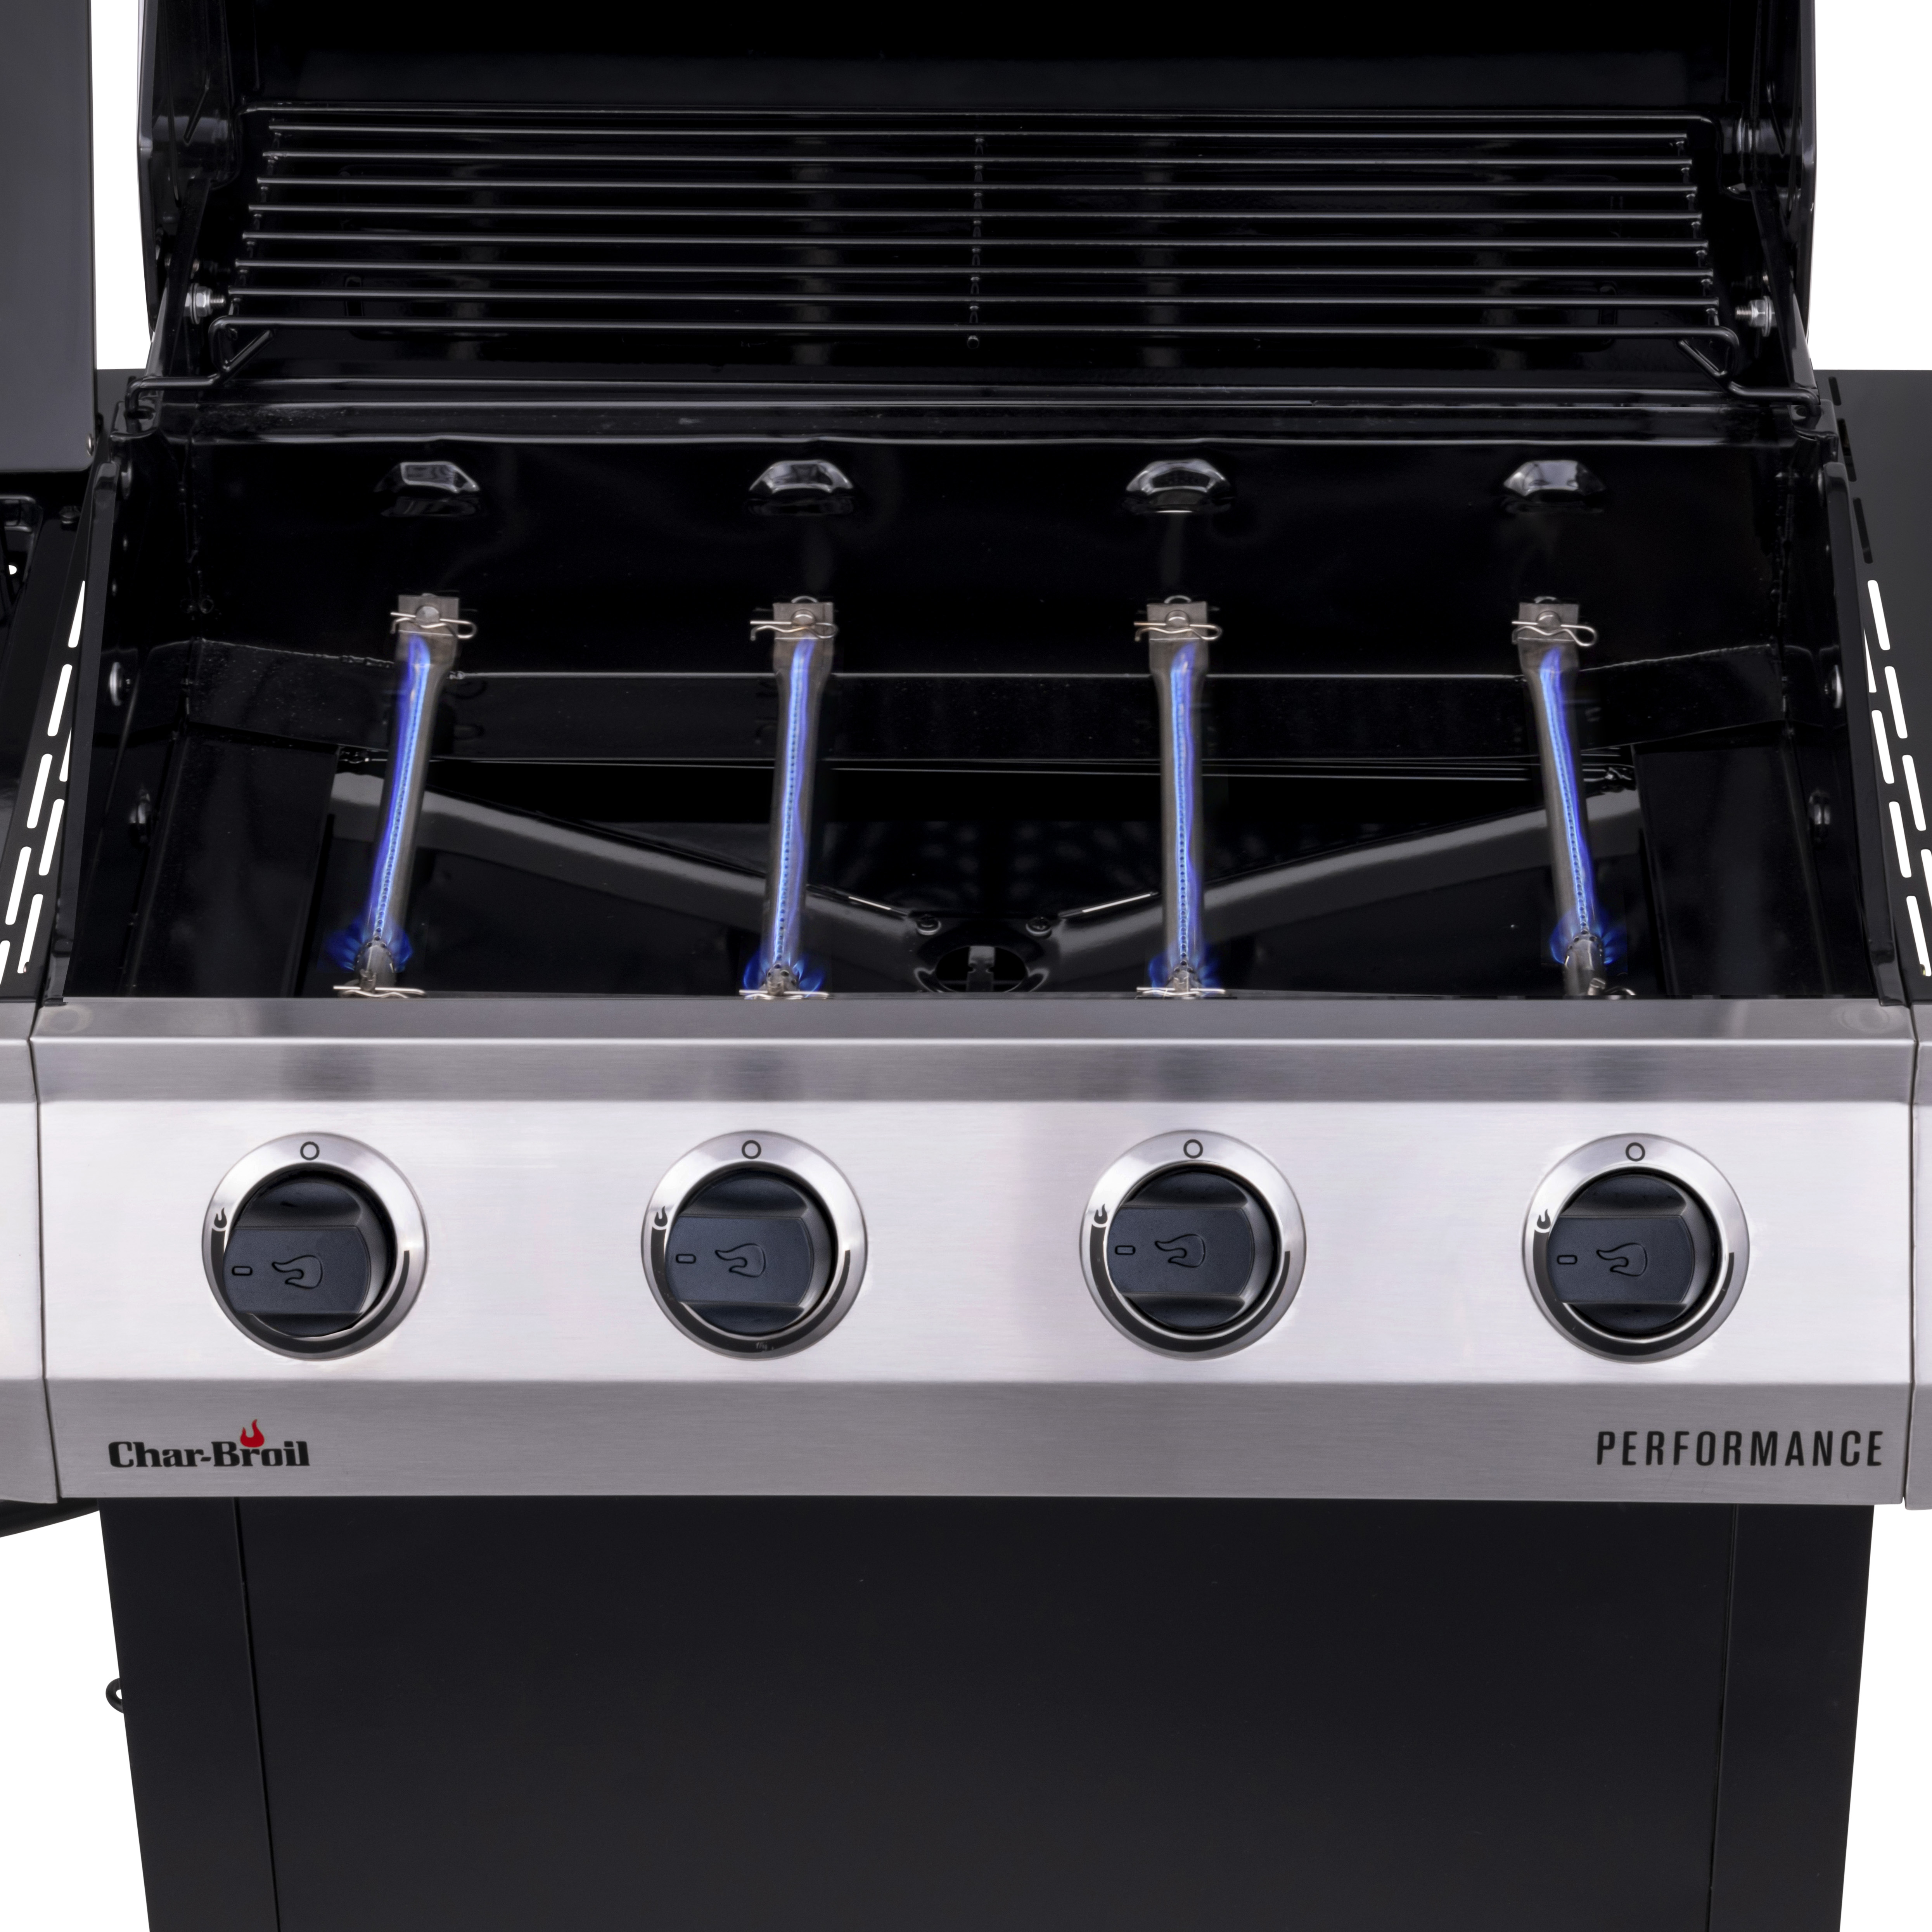 Char-Broil Performance 4-Burner Liquid Propane, Cart-Style Outdoor Gas Grill- Black - image 5 of 9